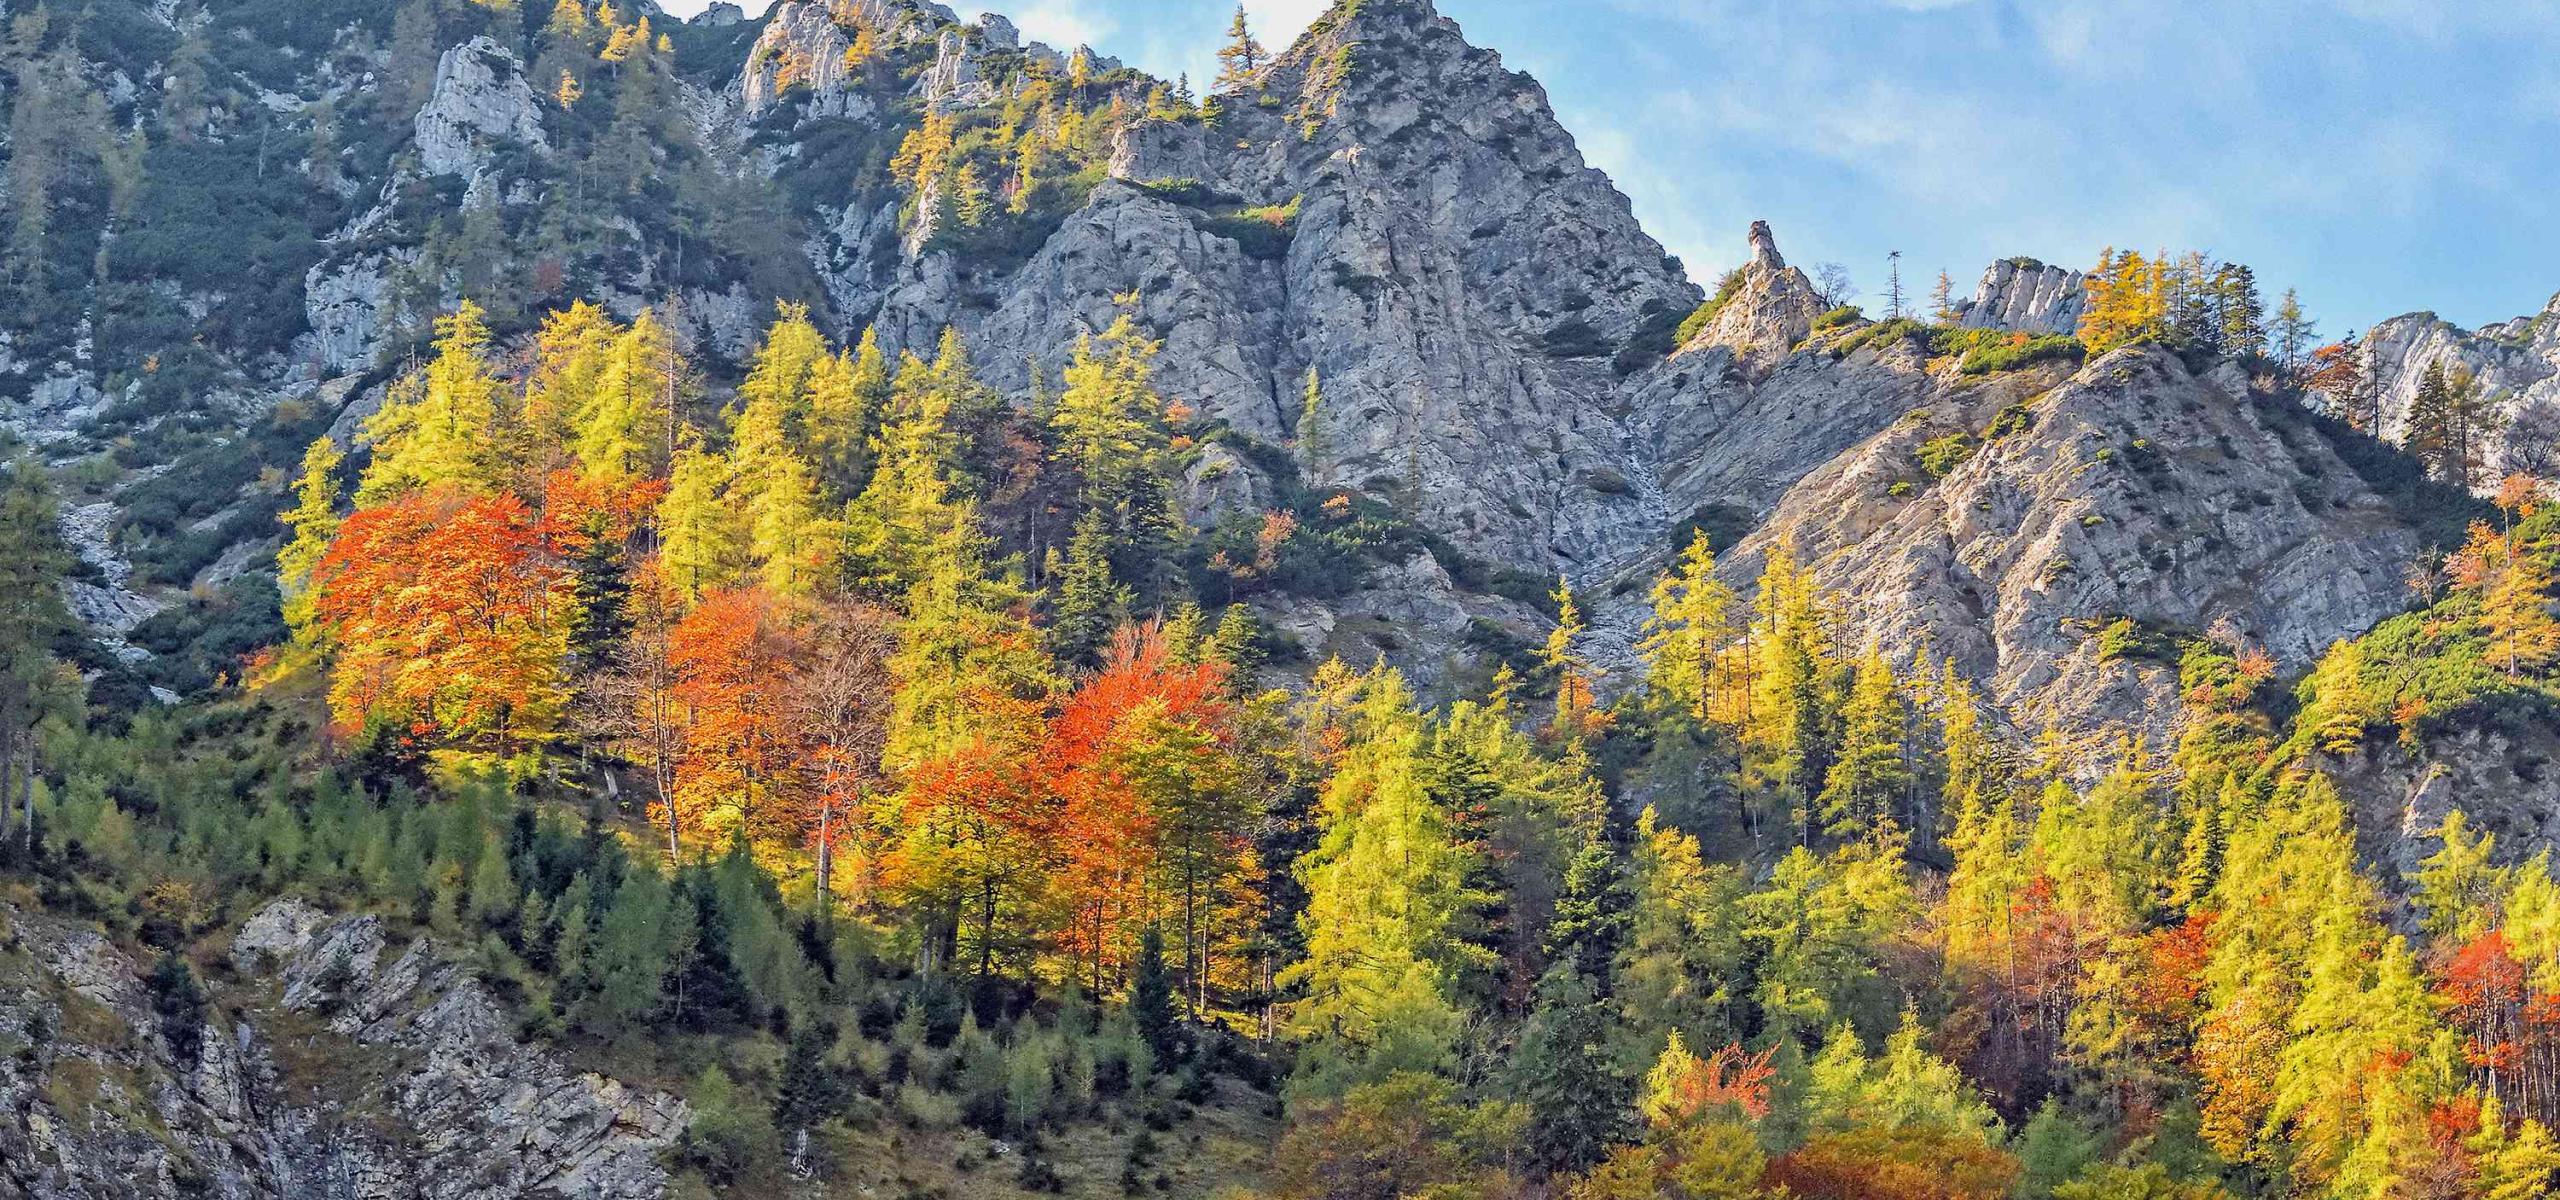 Autumn-colored beech-larch forest grows island-like in the middle of steep rocky terrain